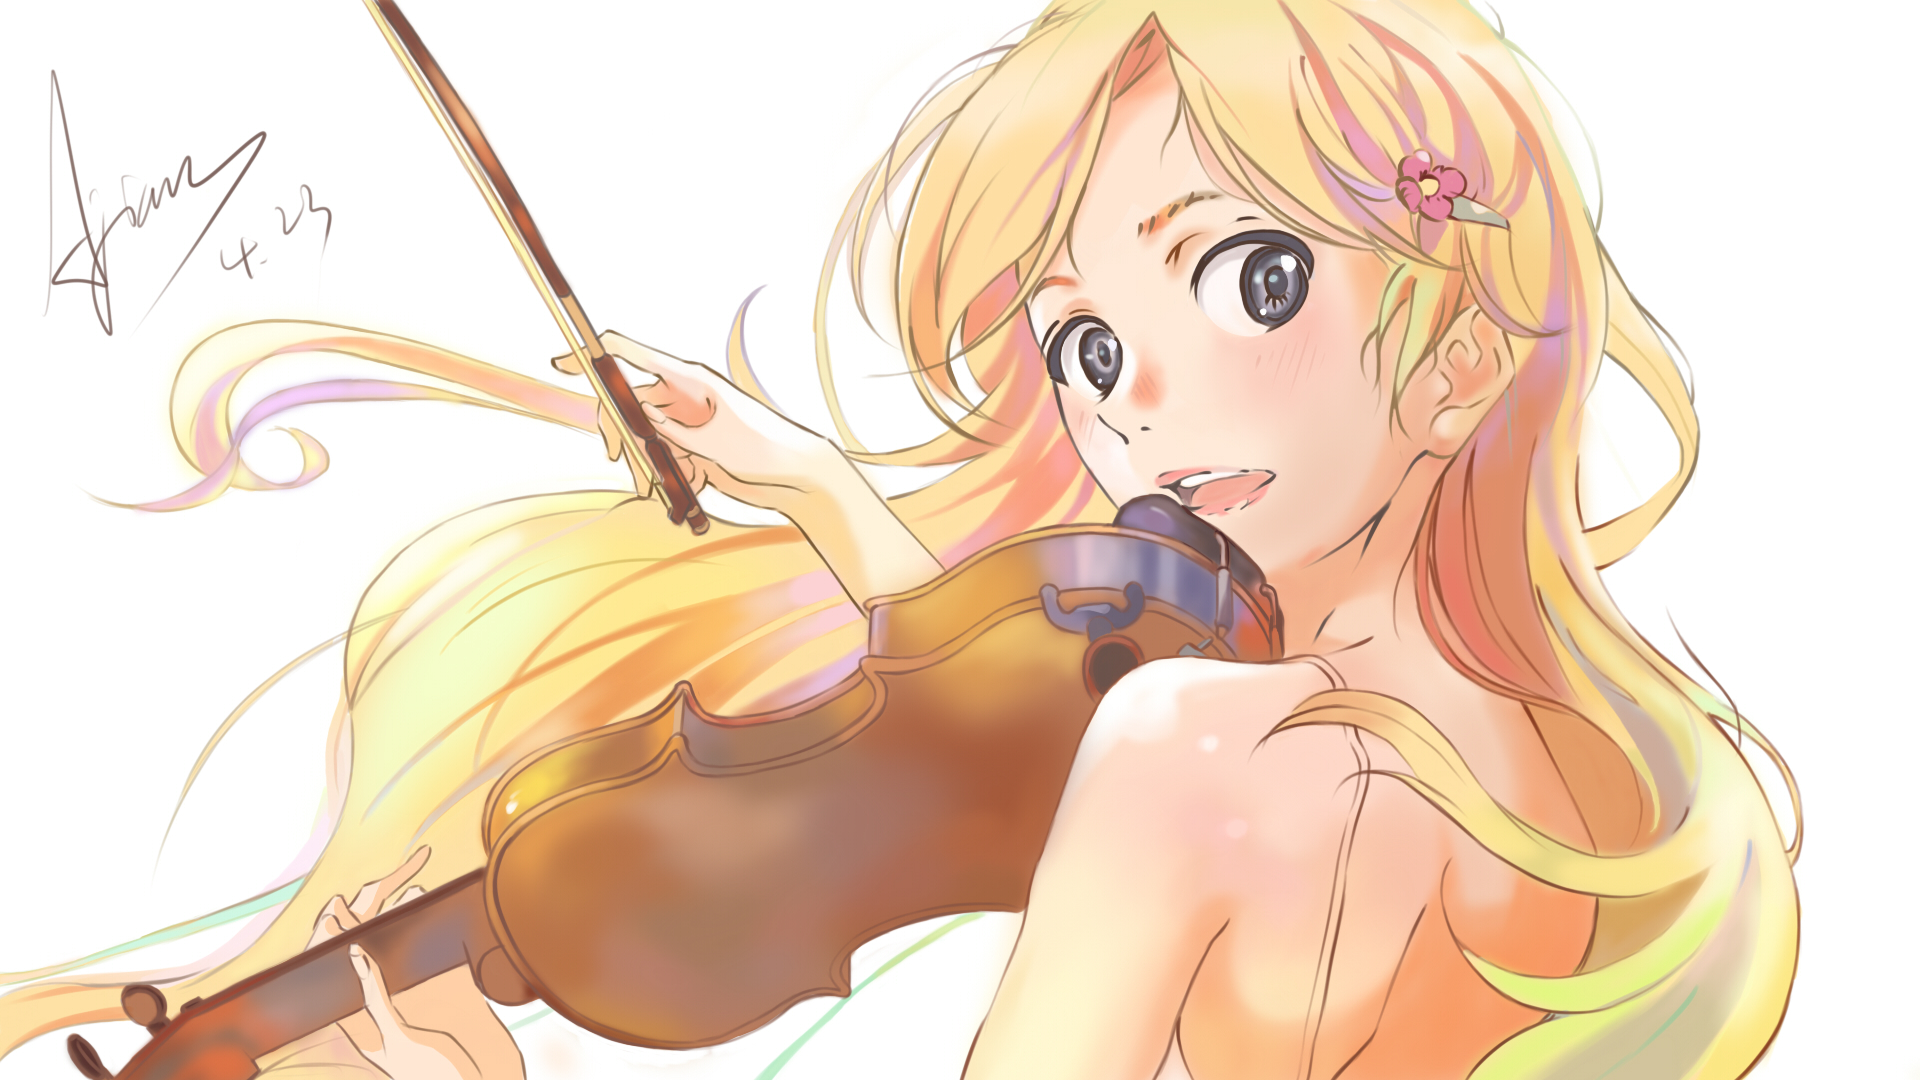 Anime Your Lie in April HD Wallpaper